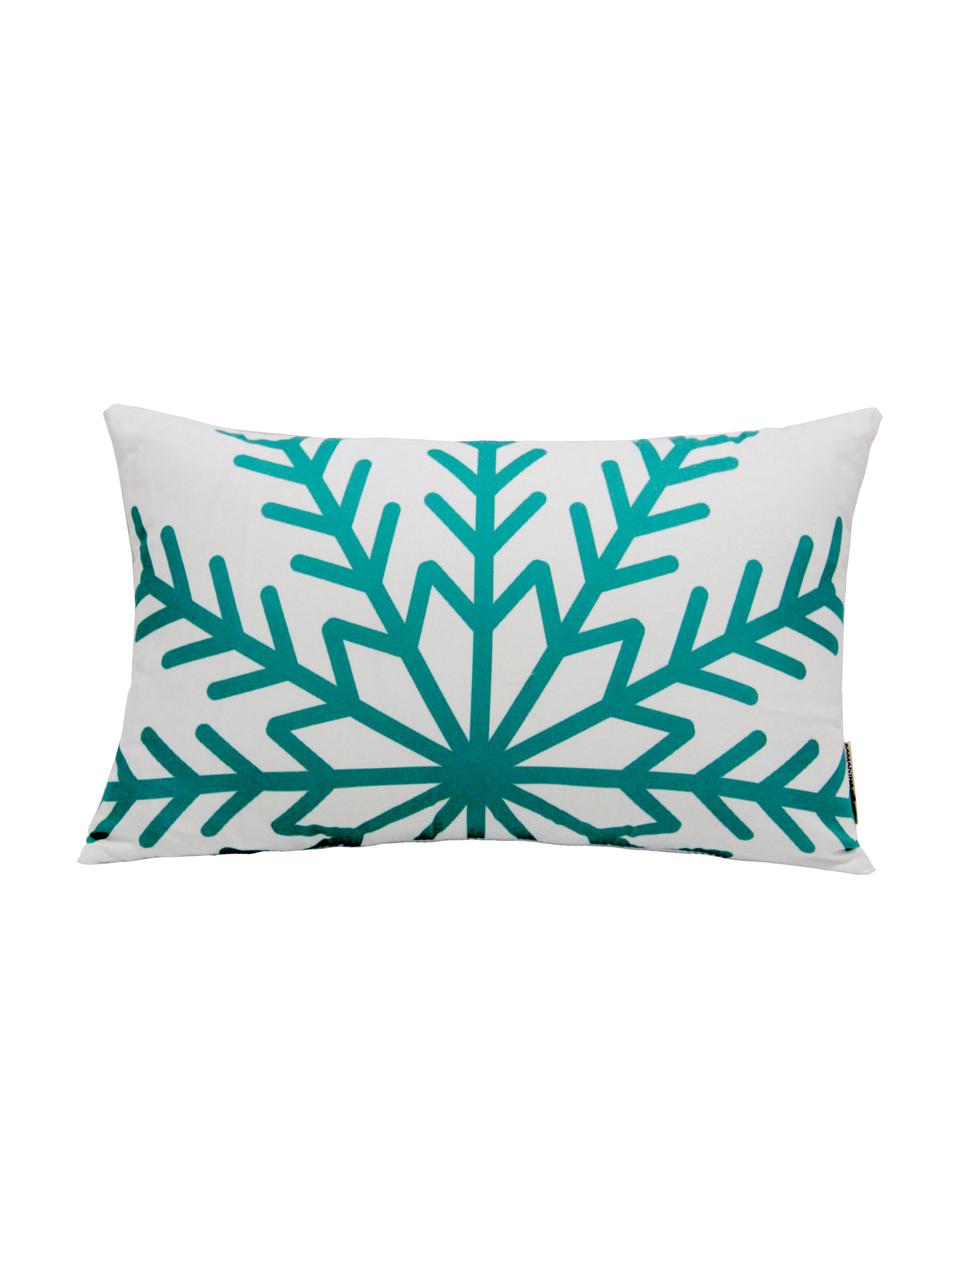 Kussenhoes Snowflake, Polyester, Turquoise, wit, 30 x 50 cm